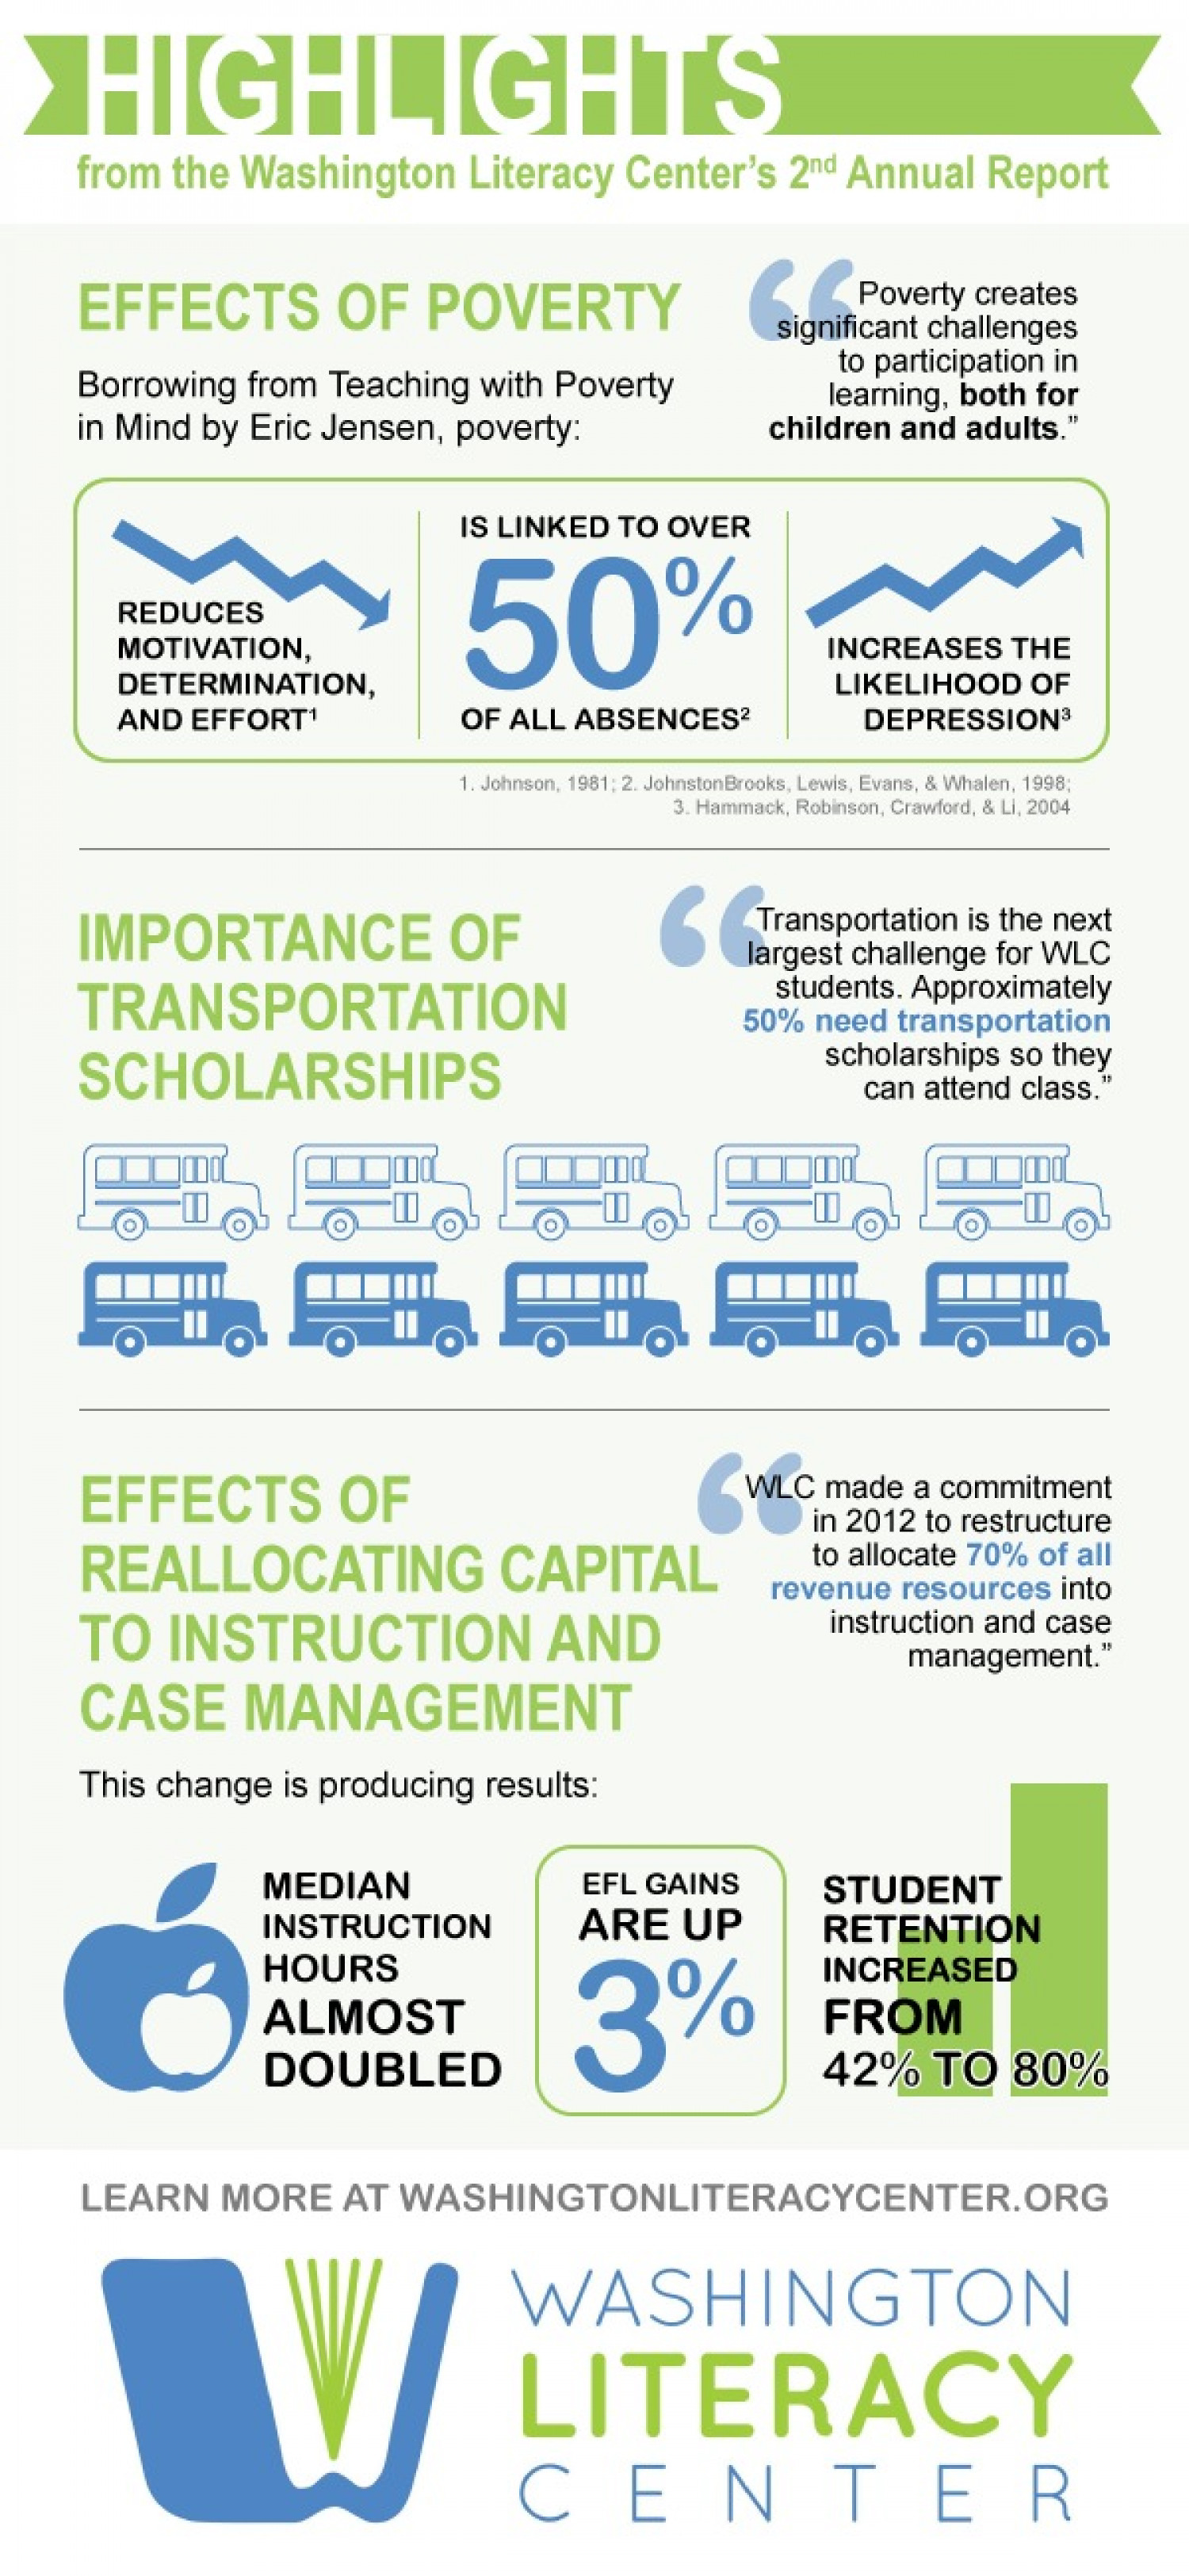 Highlights from the Washington Literacy Center's 2nd Annual Report Infographic